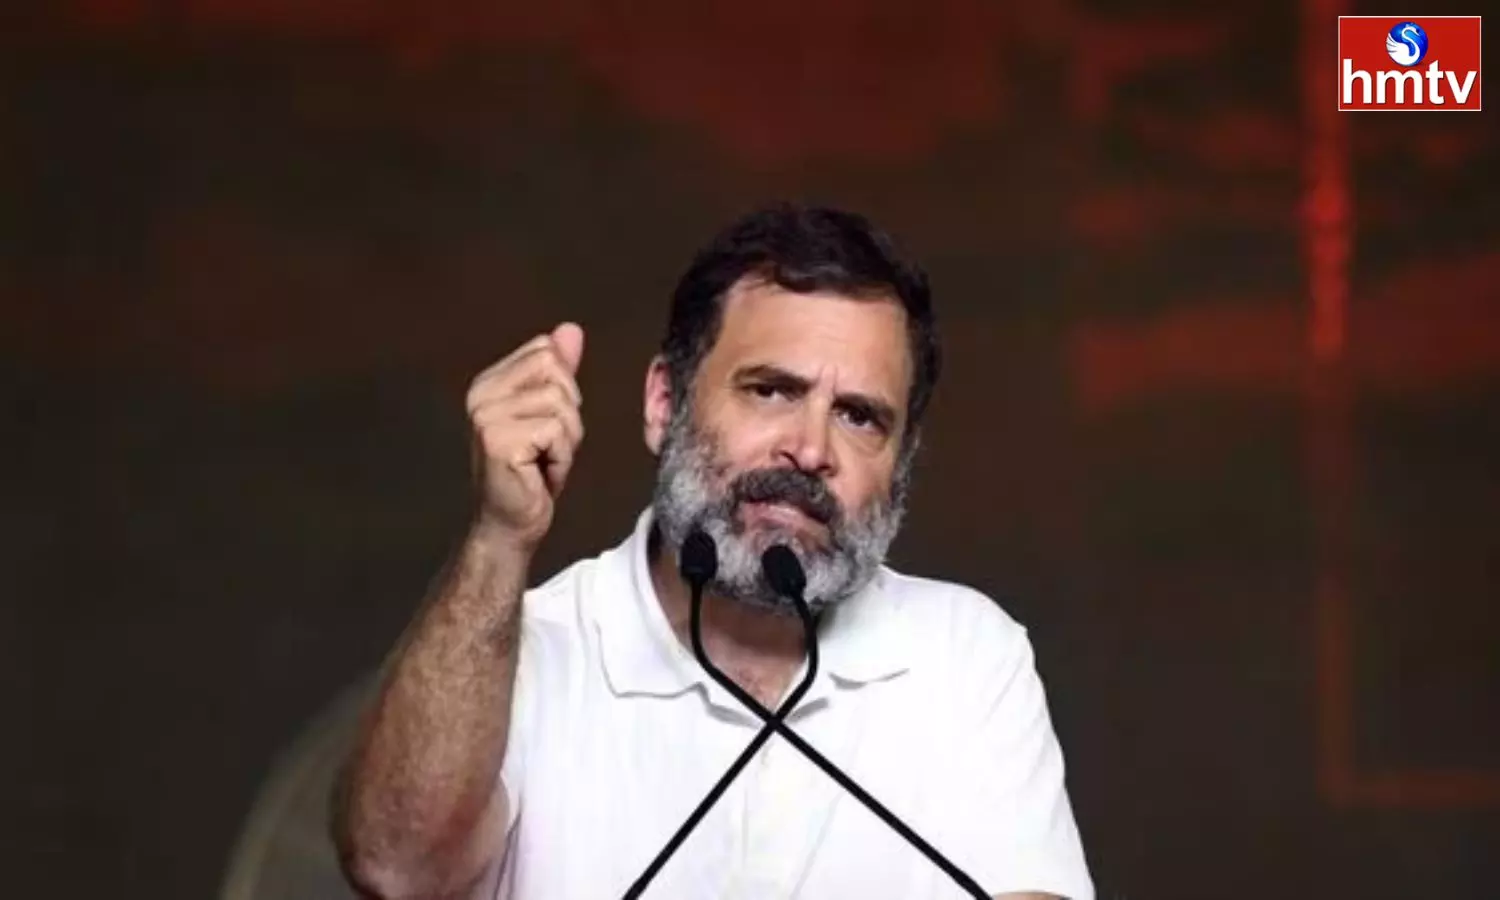 BJP Is Trying To Take Over The Country Says Rahul Gandhi